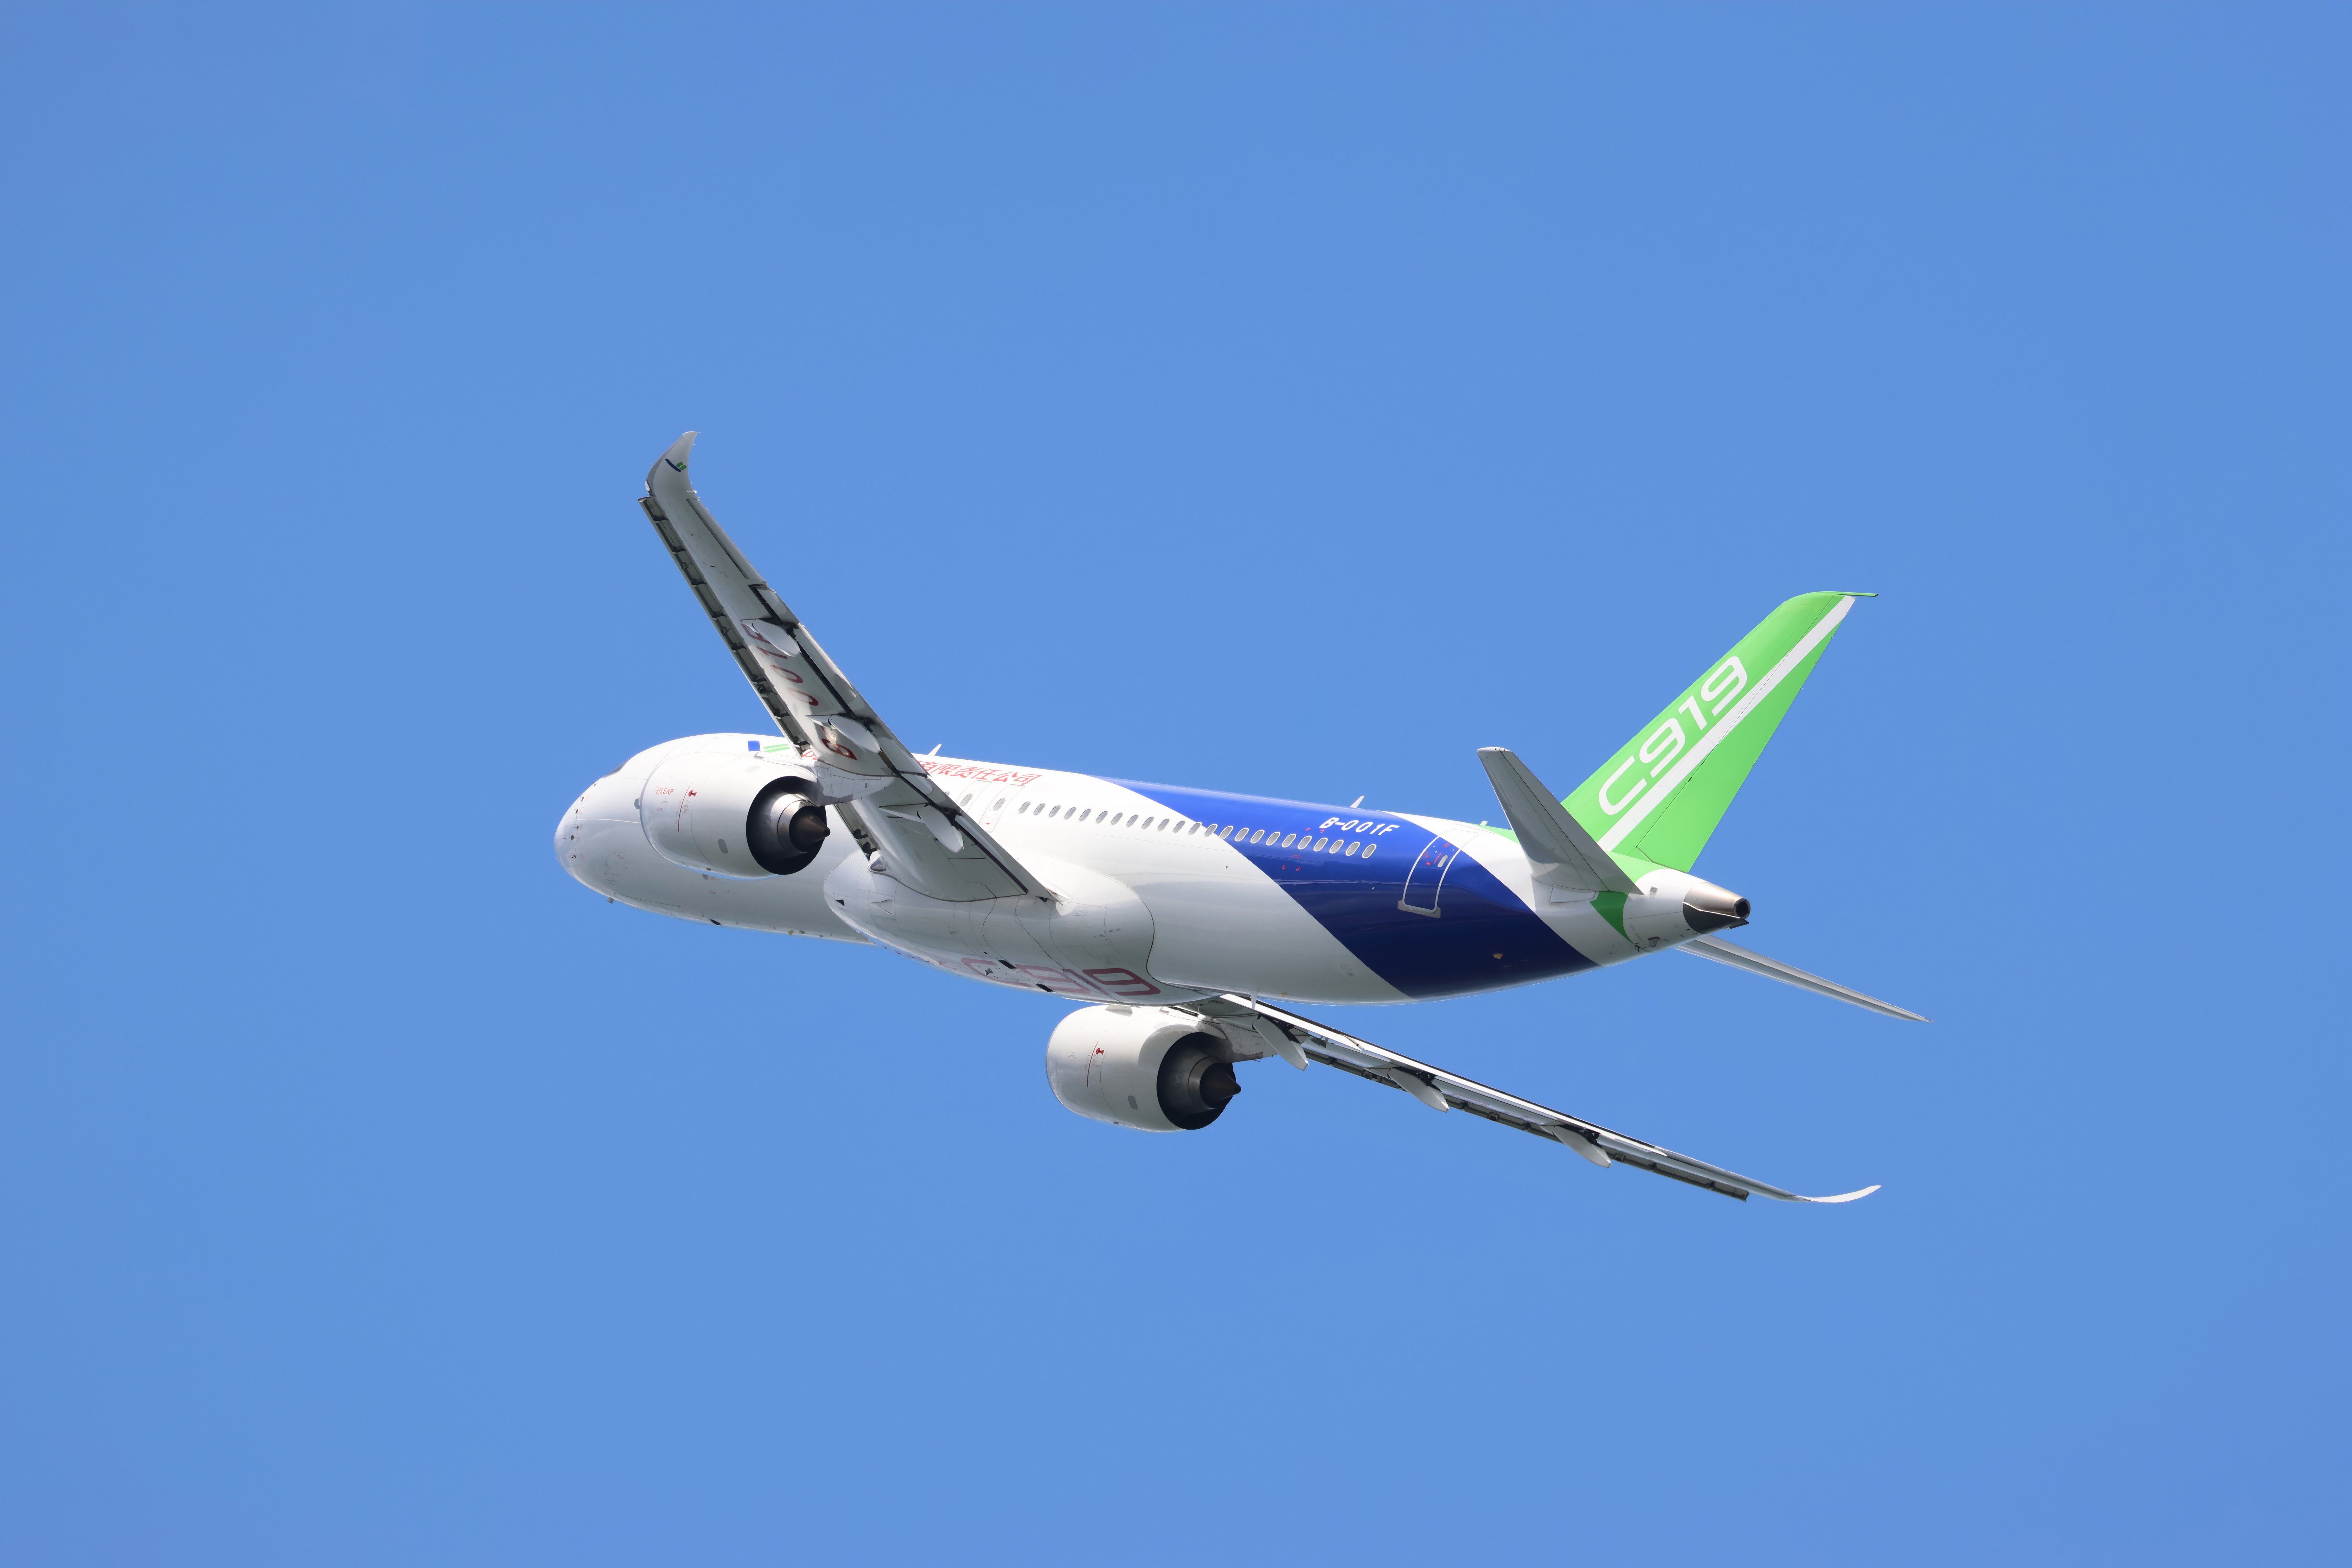 A COMAC C919 flying in the sky